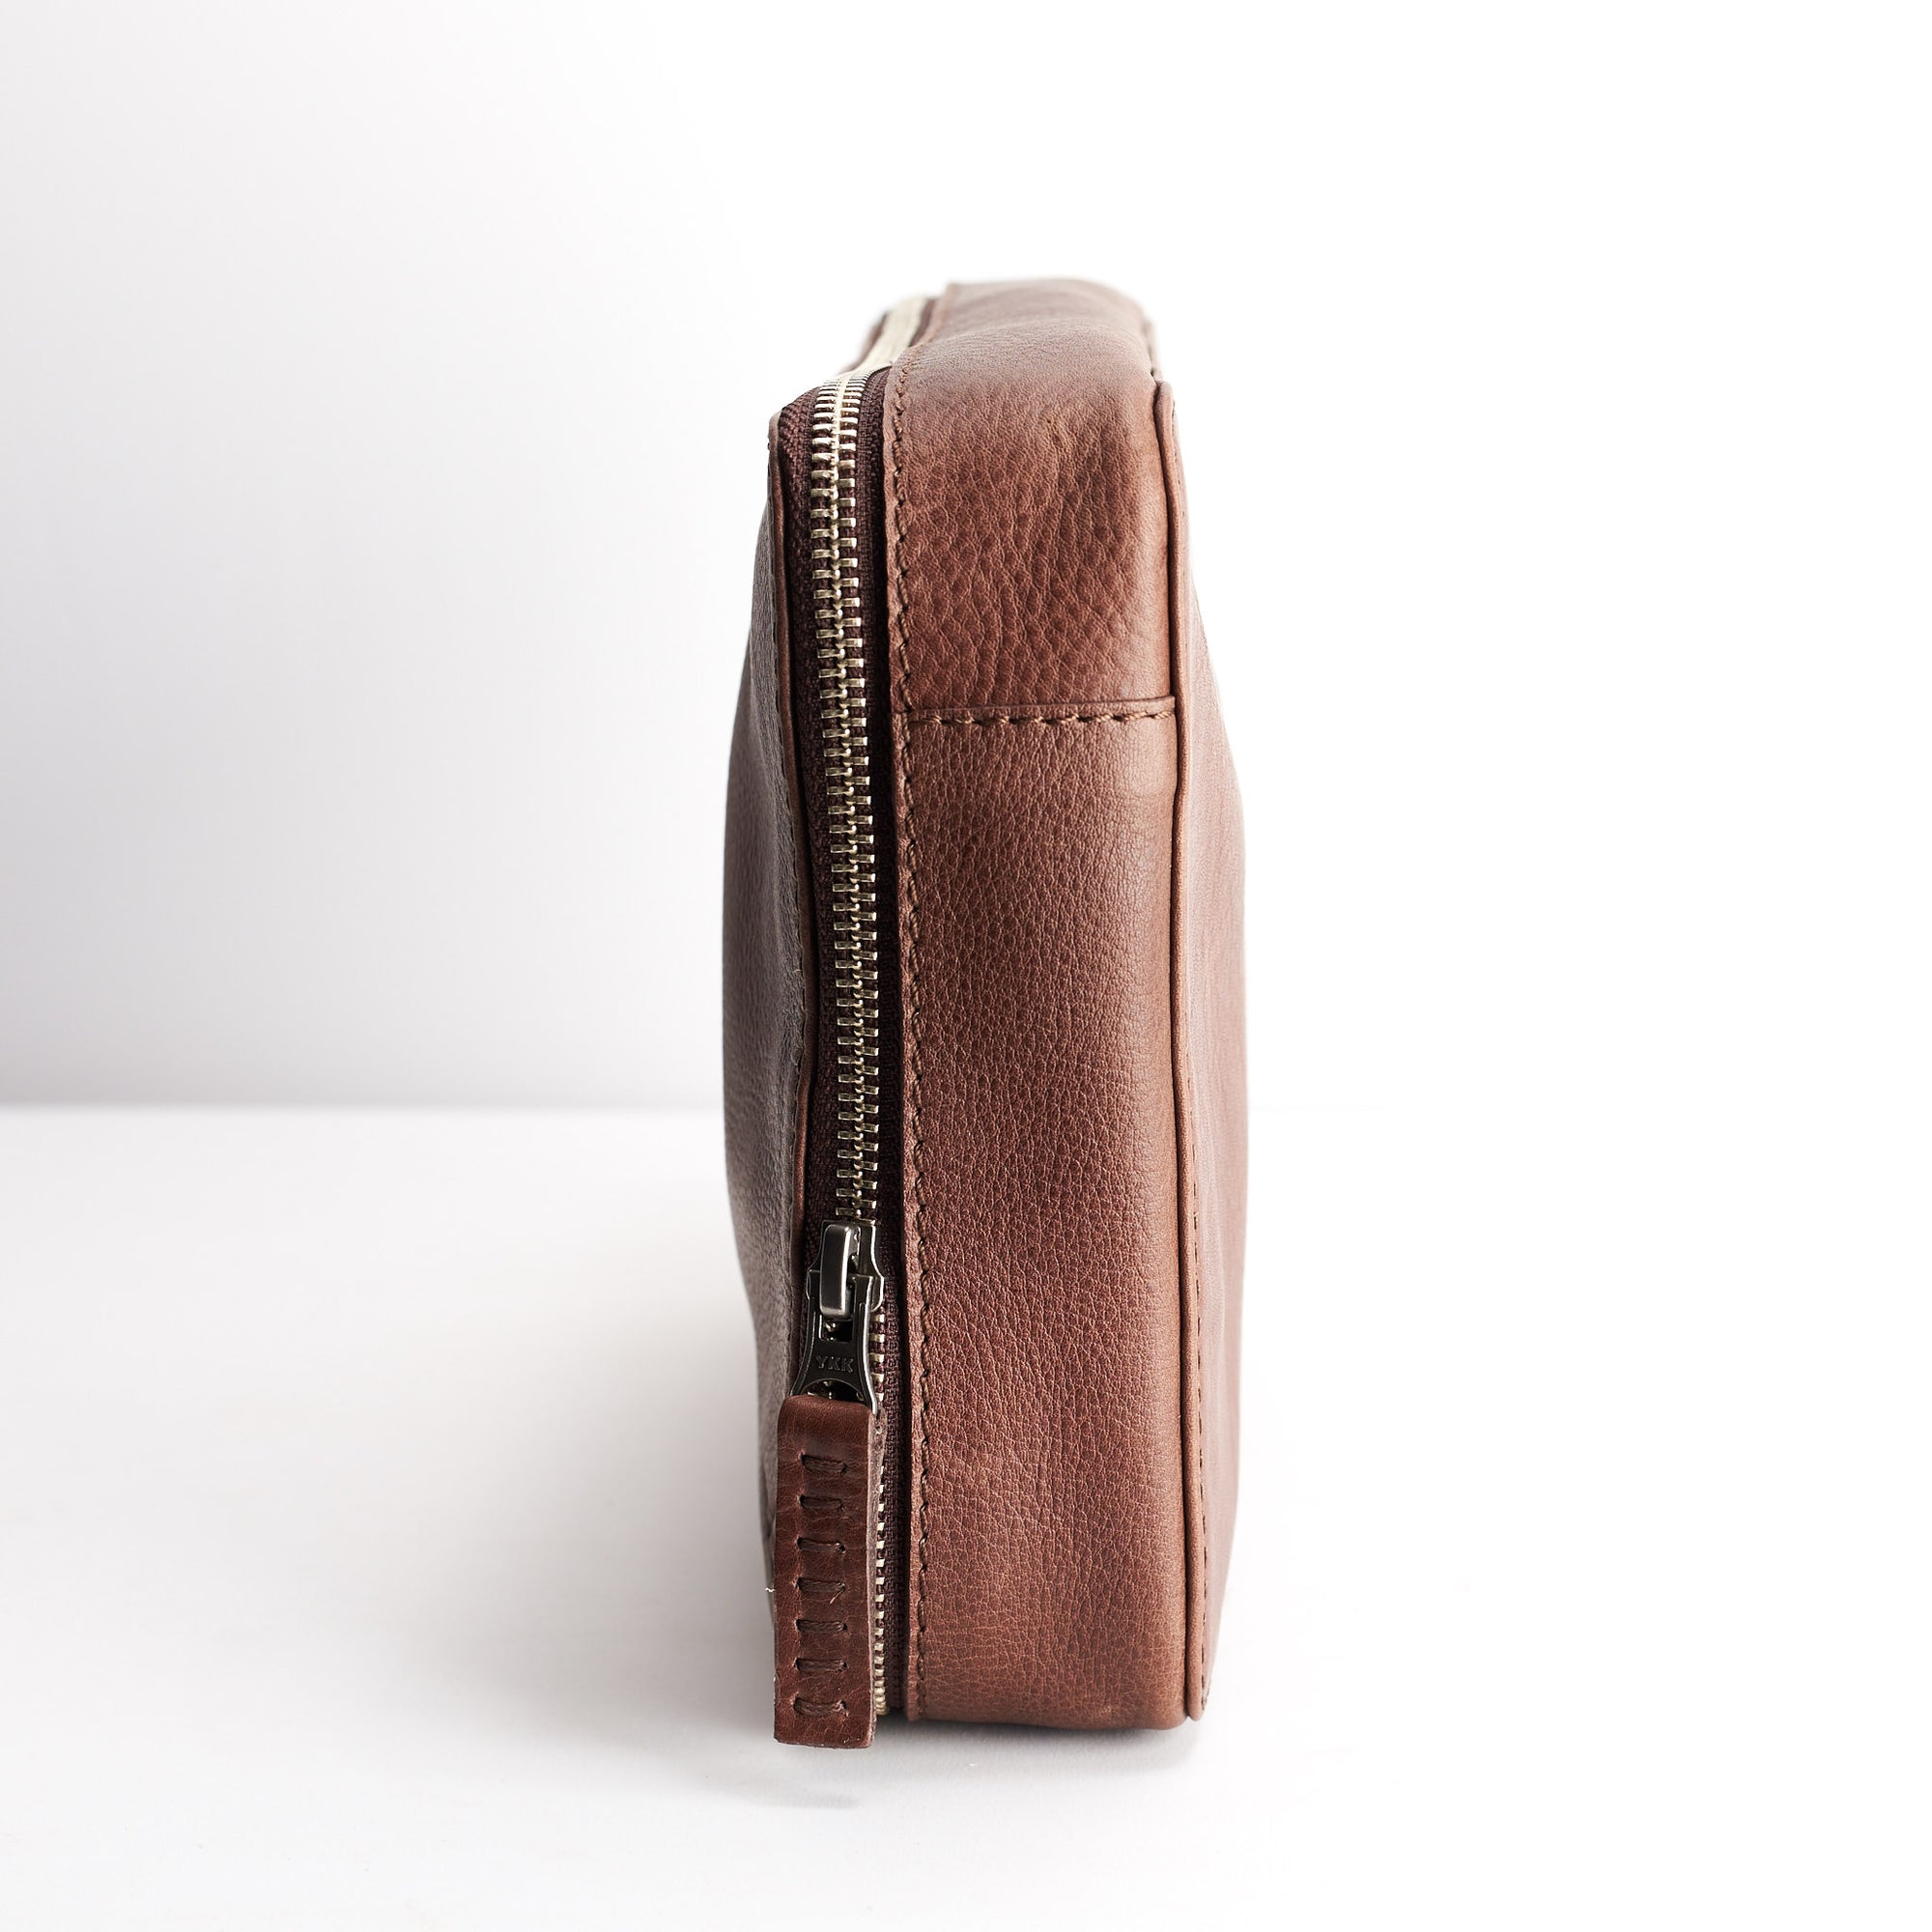 Slim profile. Brown tech organizer travel. Leather essentials bag for iPad. Travel bag by Capra Leather